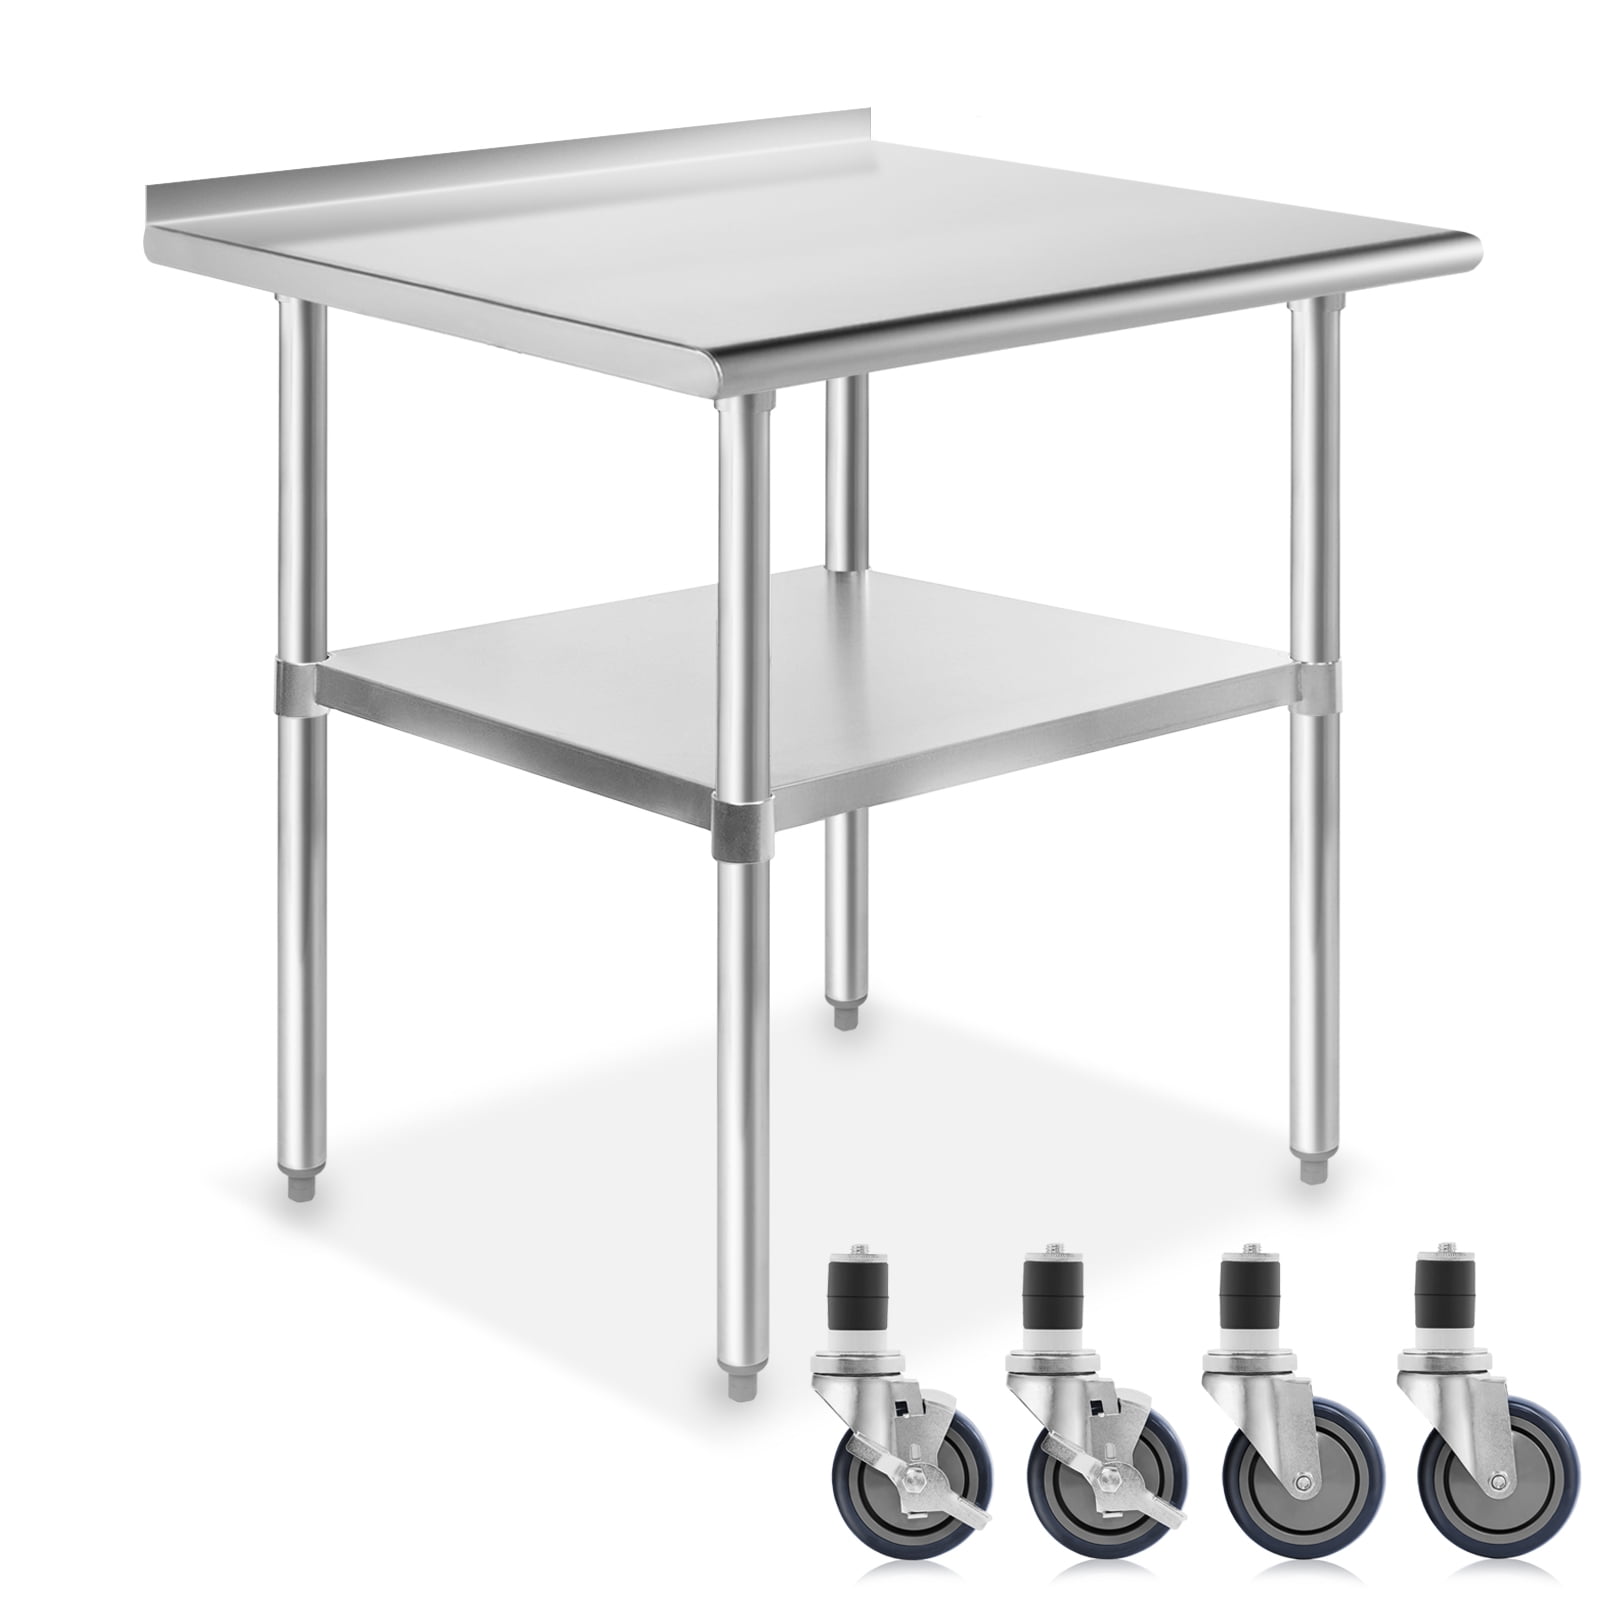 Details about   24"x36" Kitchen Stainless Steel Heavy Duty Food Prep Work Table Durable Sturdy 